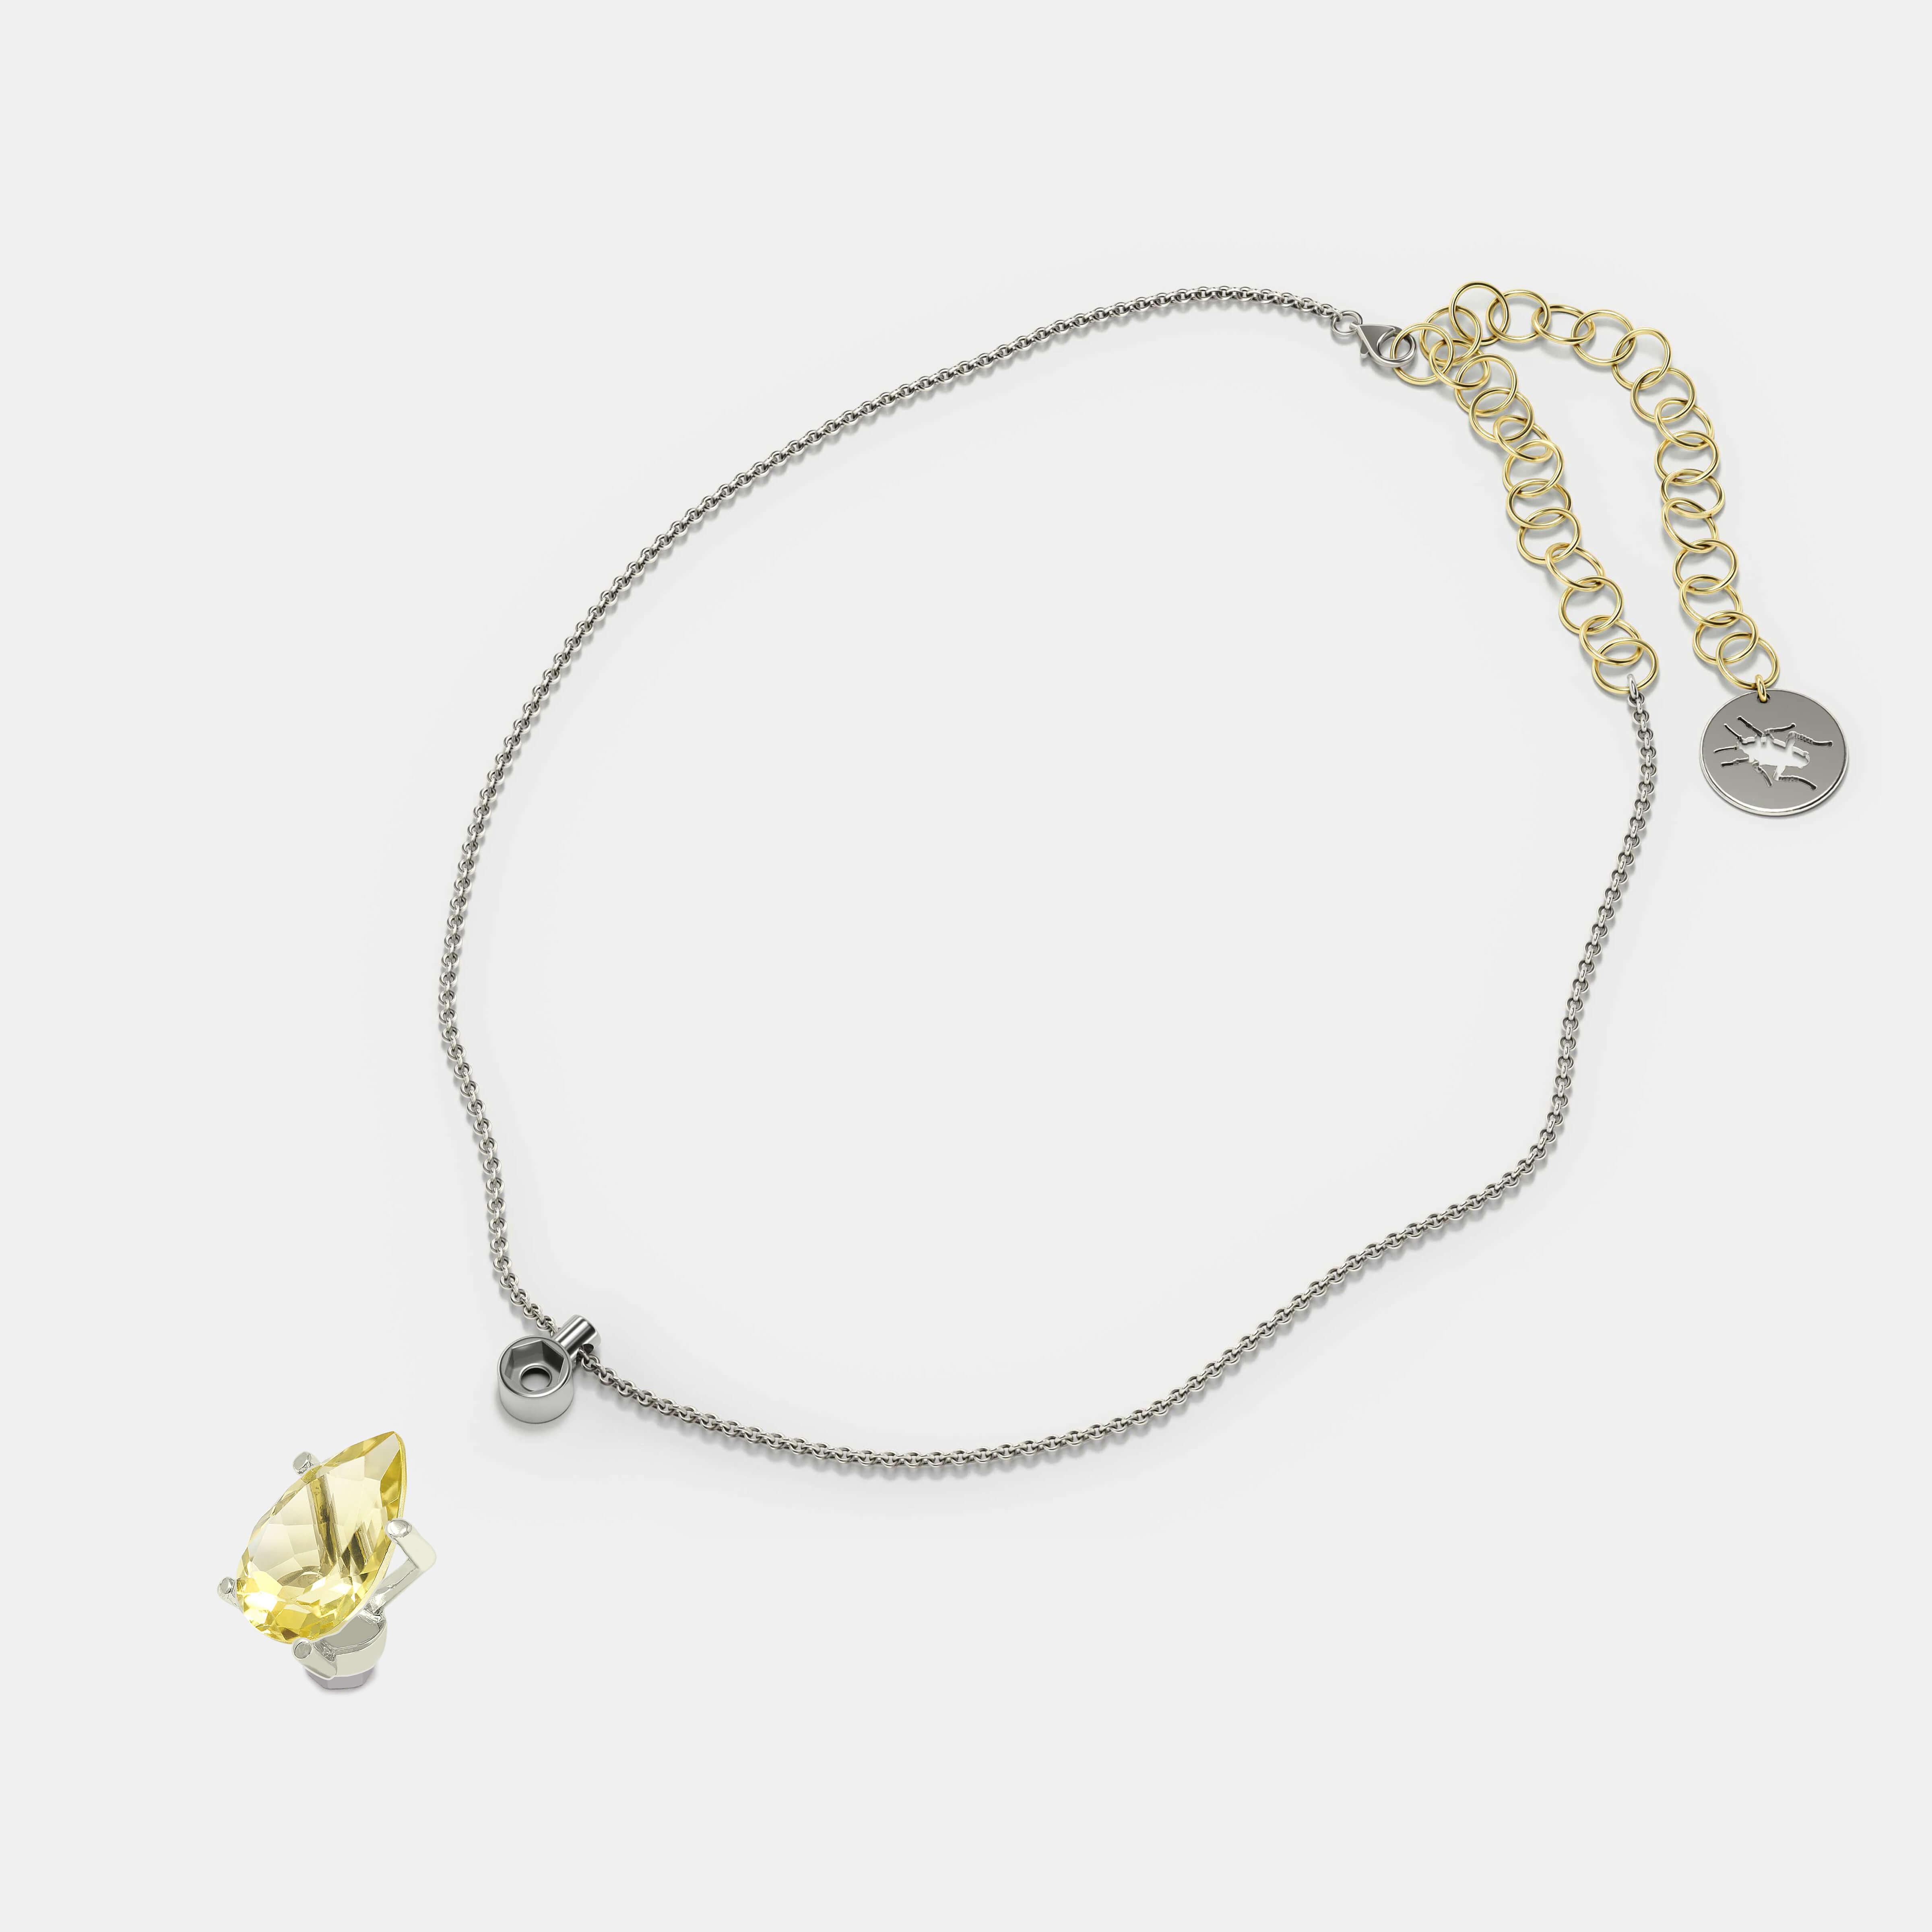 Fine Chain Necklace Gold 
with Lemon Quartz in White Gold, 18K head
Maximum length - 45 cm, minimum length - 35 cm

You can put and take on the Lemon Quartz in a Chain Necklace.
This is only possible with a surgical steel mechanism. Surgical steel